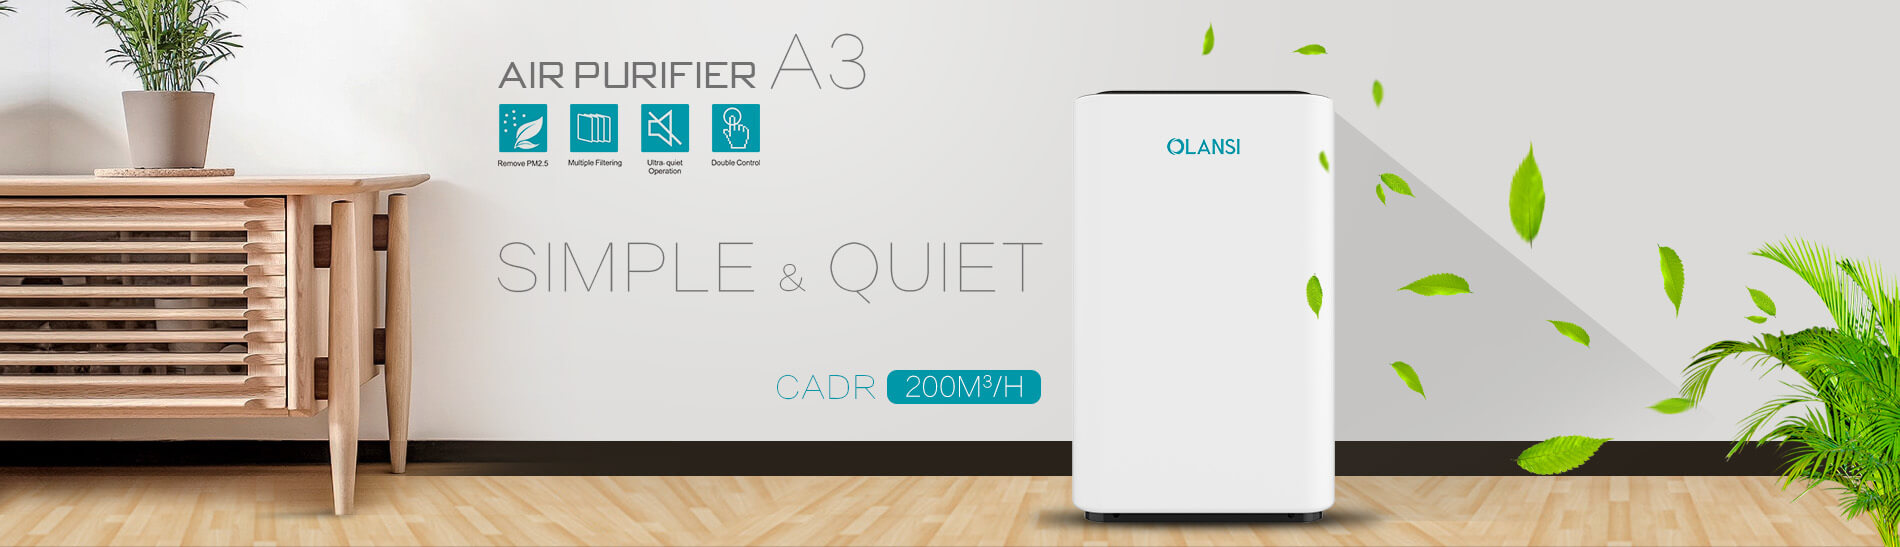 Olansi Healthcare Co., Ltd Presents a Wide Range Of Home Air Purifiers To Prevent Covid-19 Viruses Spreading